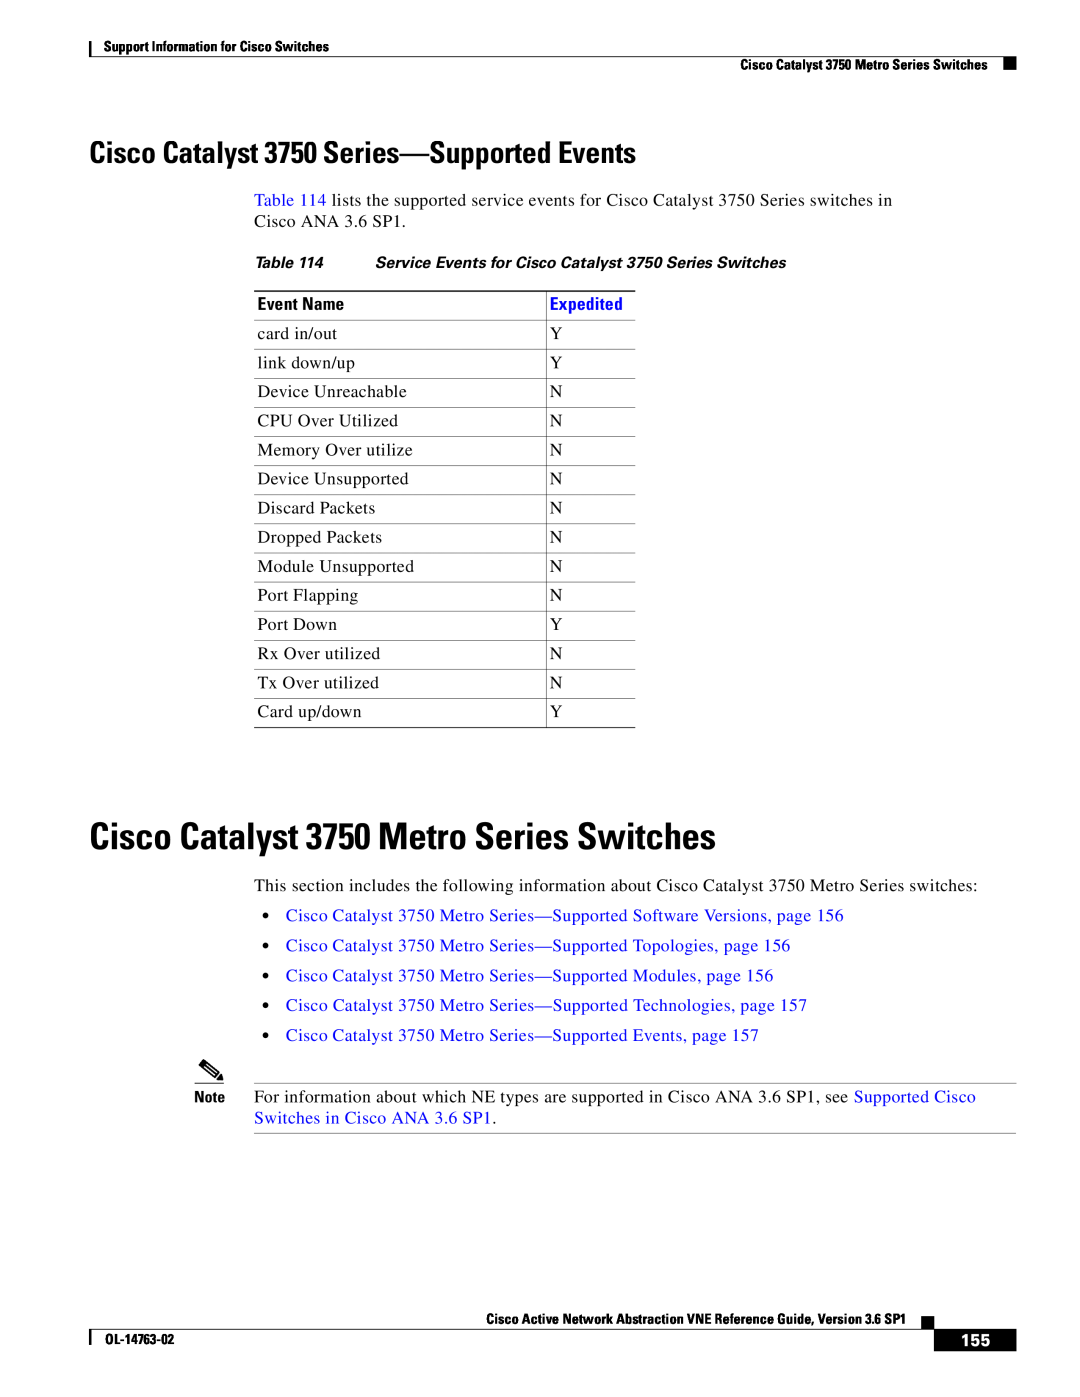 Cisco Systems OL-14763-02 manual Cisco Catalyst 3750 Metro Series Switches, Cisco Catalyst 3750 Series-Supported Events 